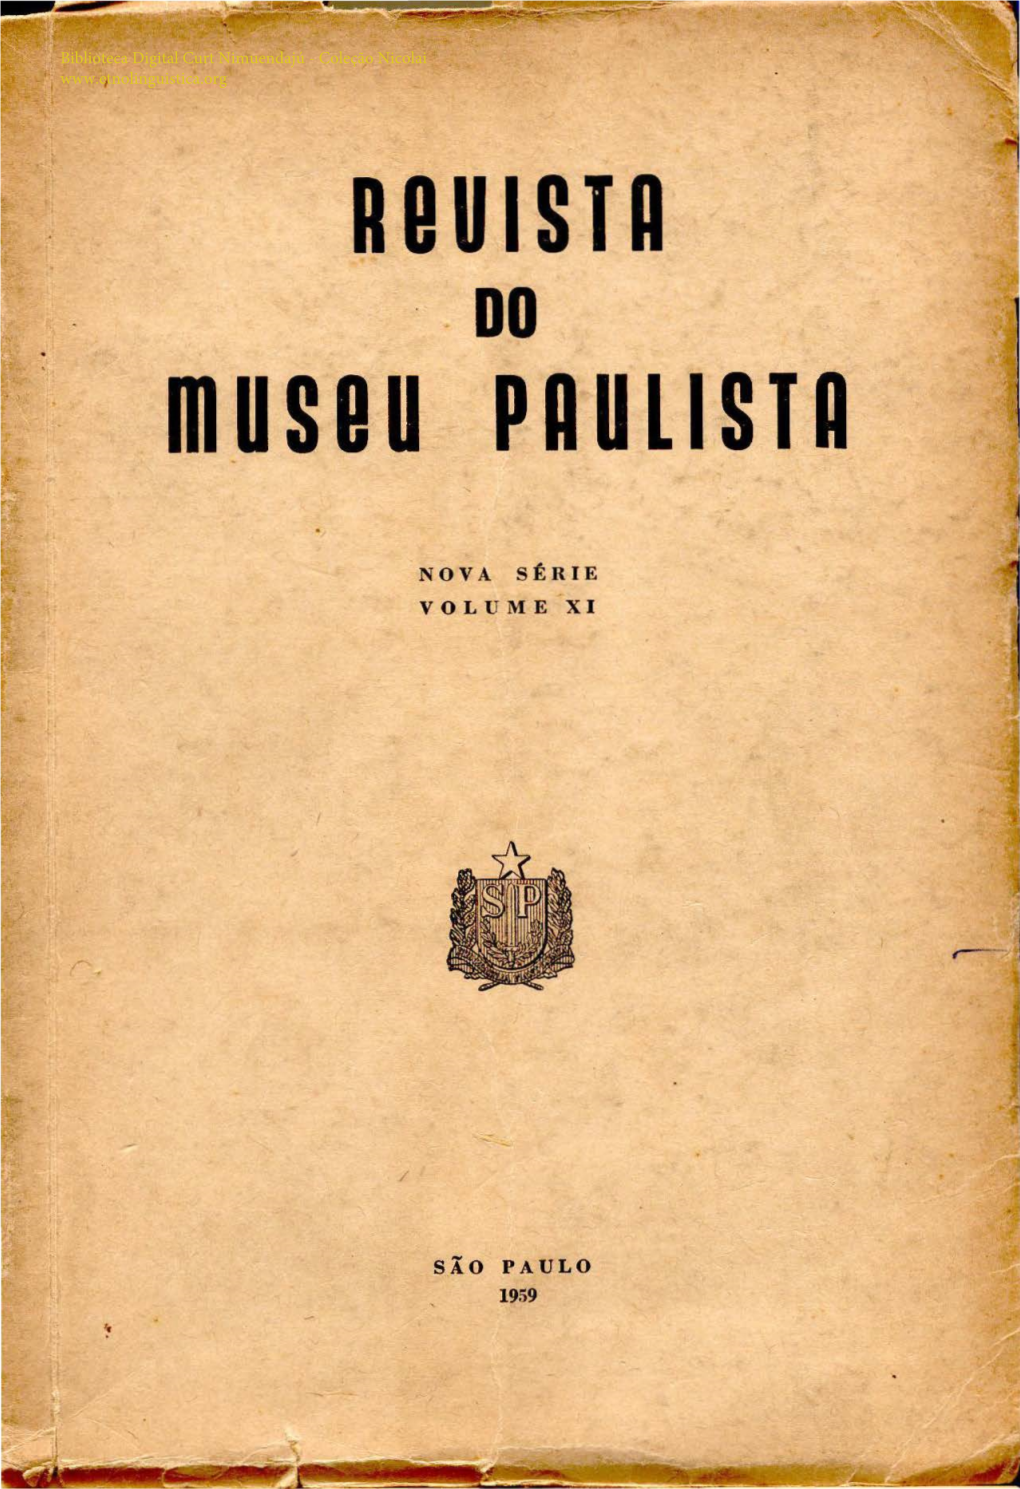 CATALOGUE of the SILVA CASTRO COLLECTION By